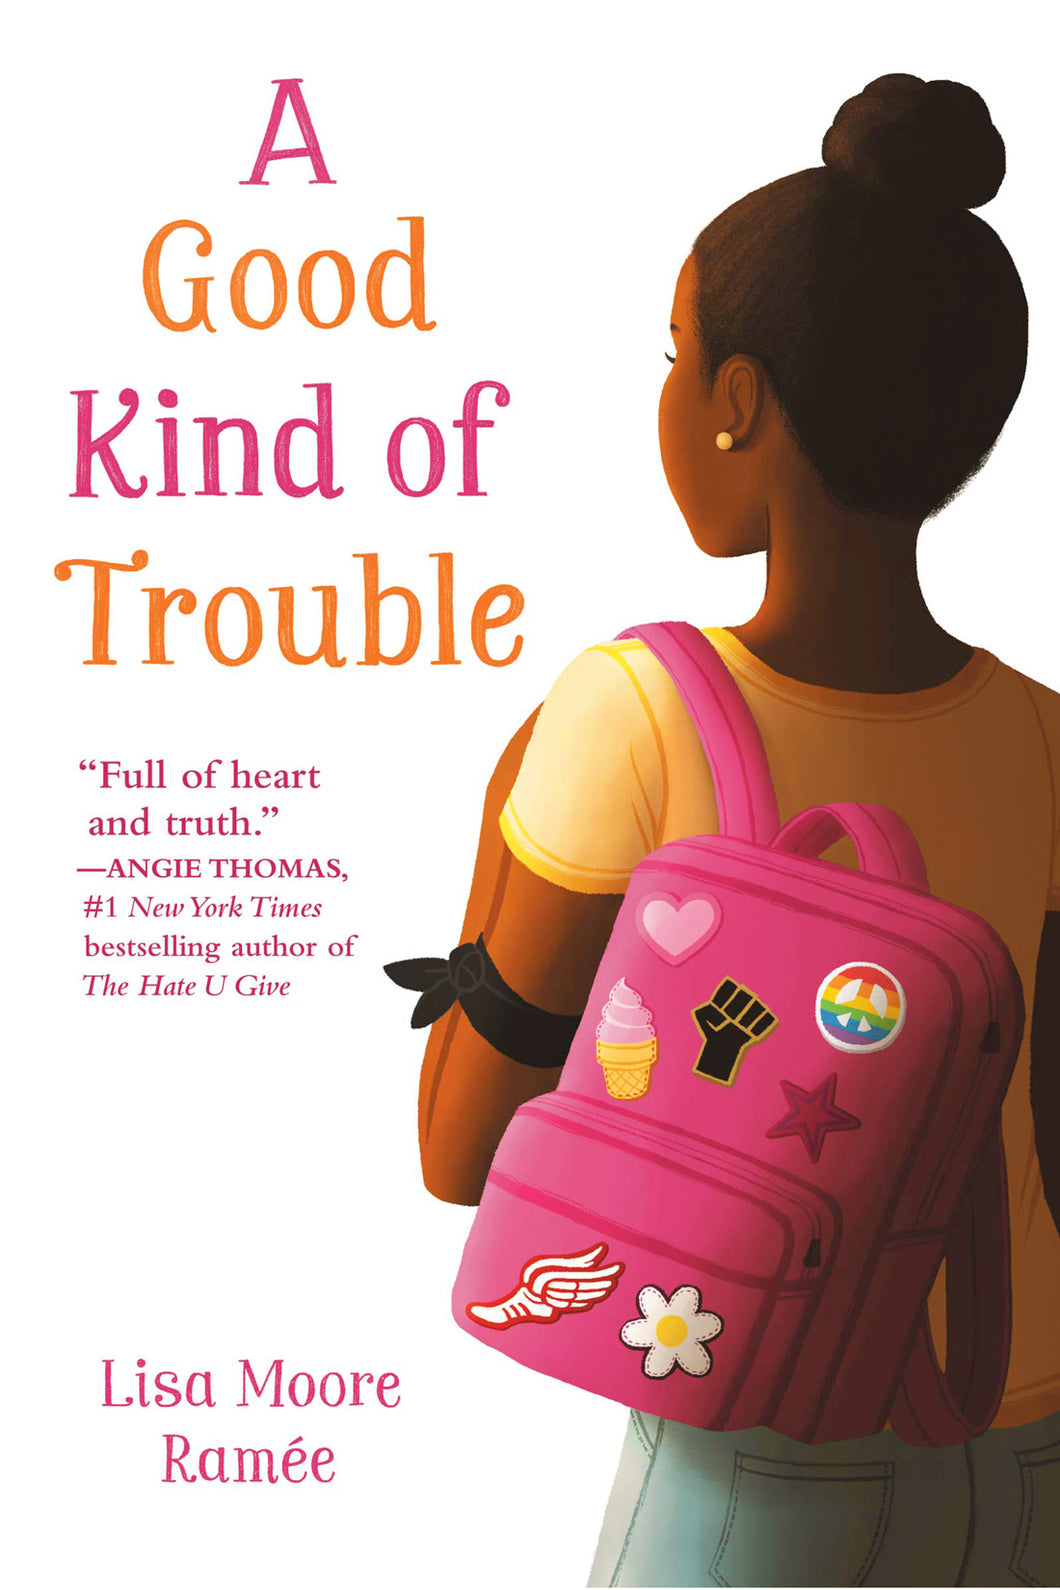 A Good Kind of Trouble by Lisa Moore Ramée / Hardcover or Paperback - NEW BOOK